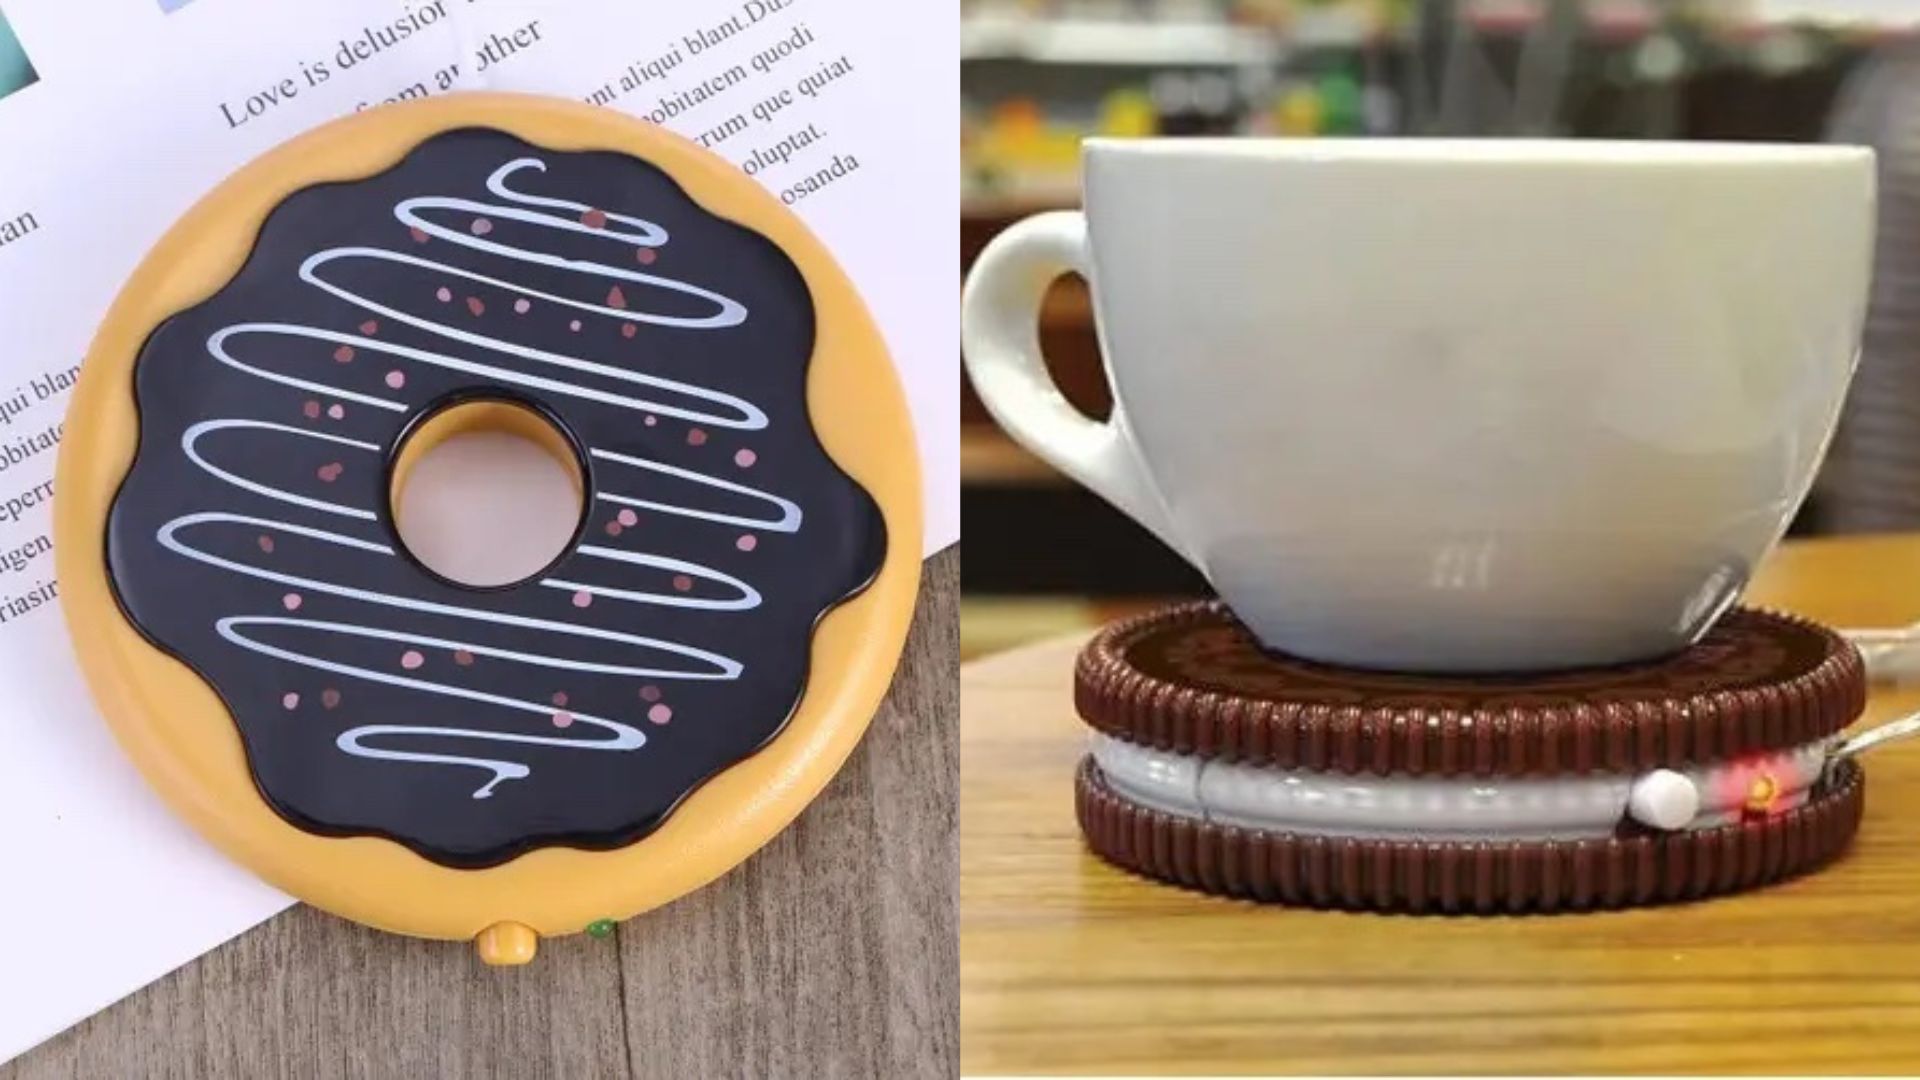 Hot Cookie USB Cup Warmer - Keep Your Hot Beverage Warm With This